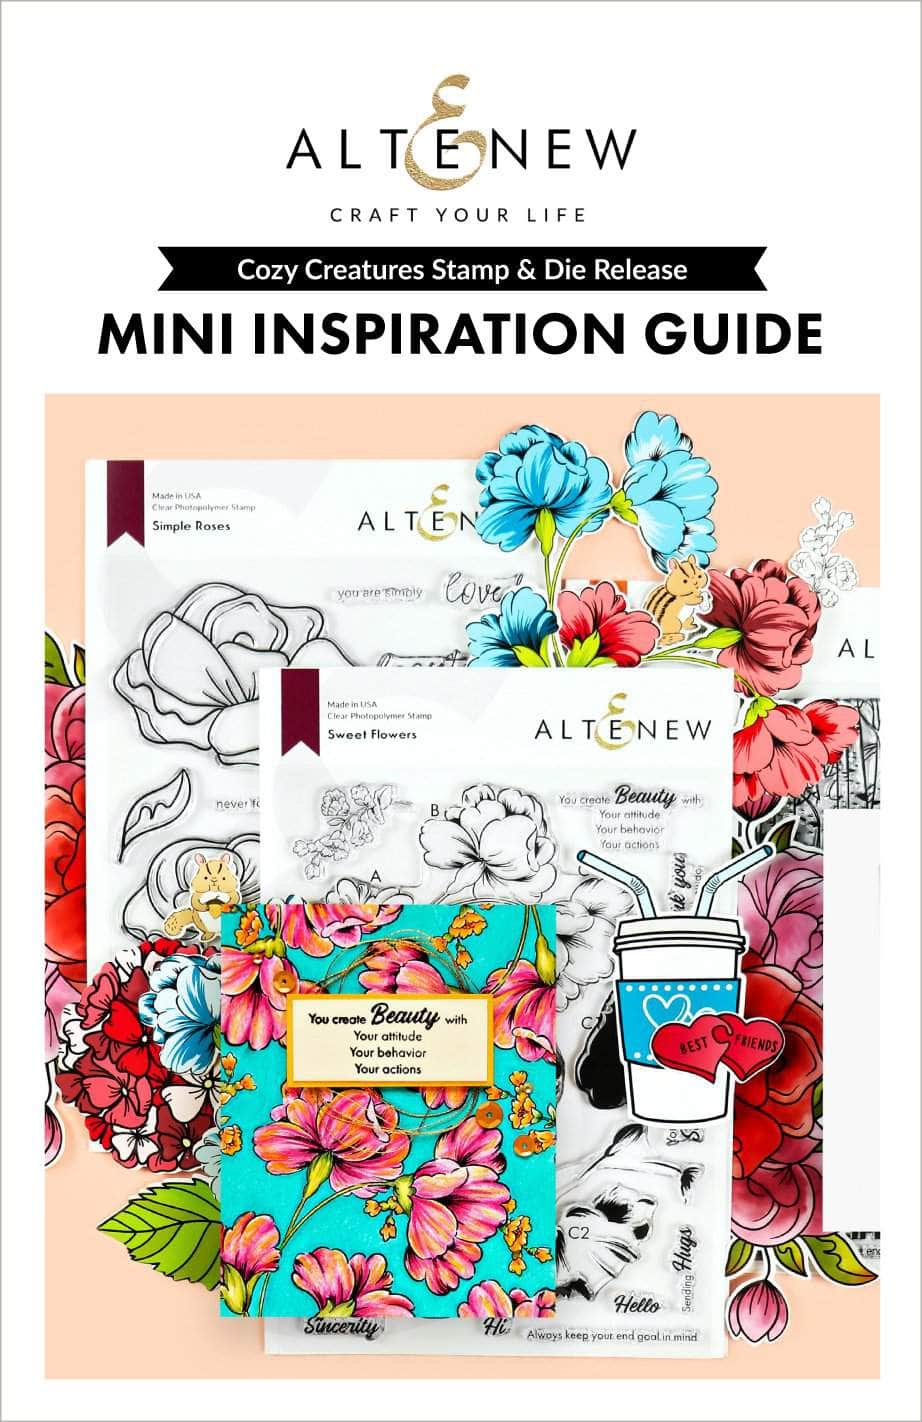 Printed Media Cozy Creatures Stamp & Die Release Mini Inspiration Guide